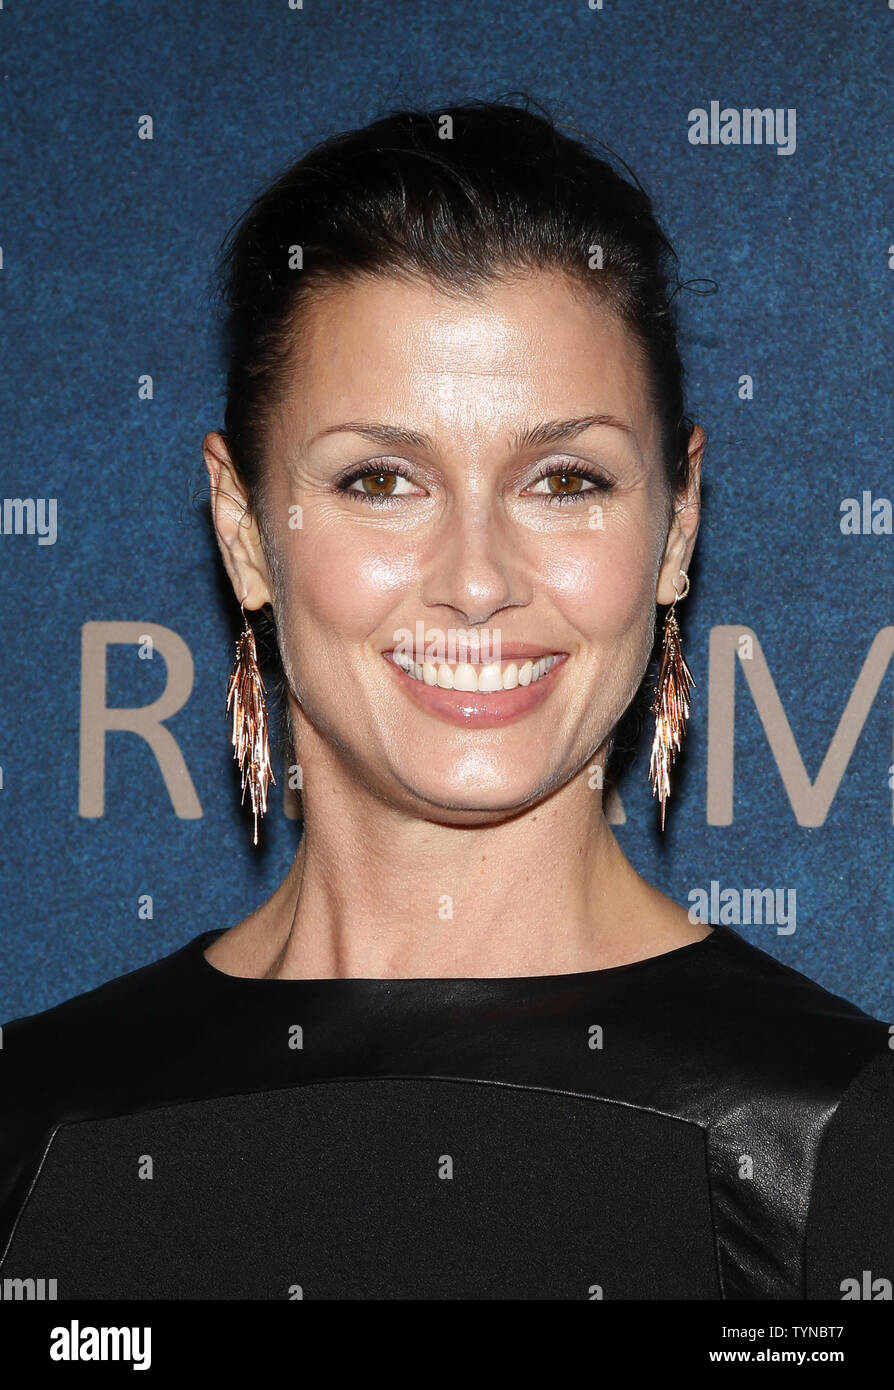 Bridget Moynahan arrives on the red carpet at the 'Les Miserables' premiere at Ziegfeld Theater in New York City on December 10, 2012.           UPI/John Angelillo Stock Photo